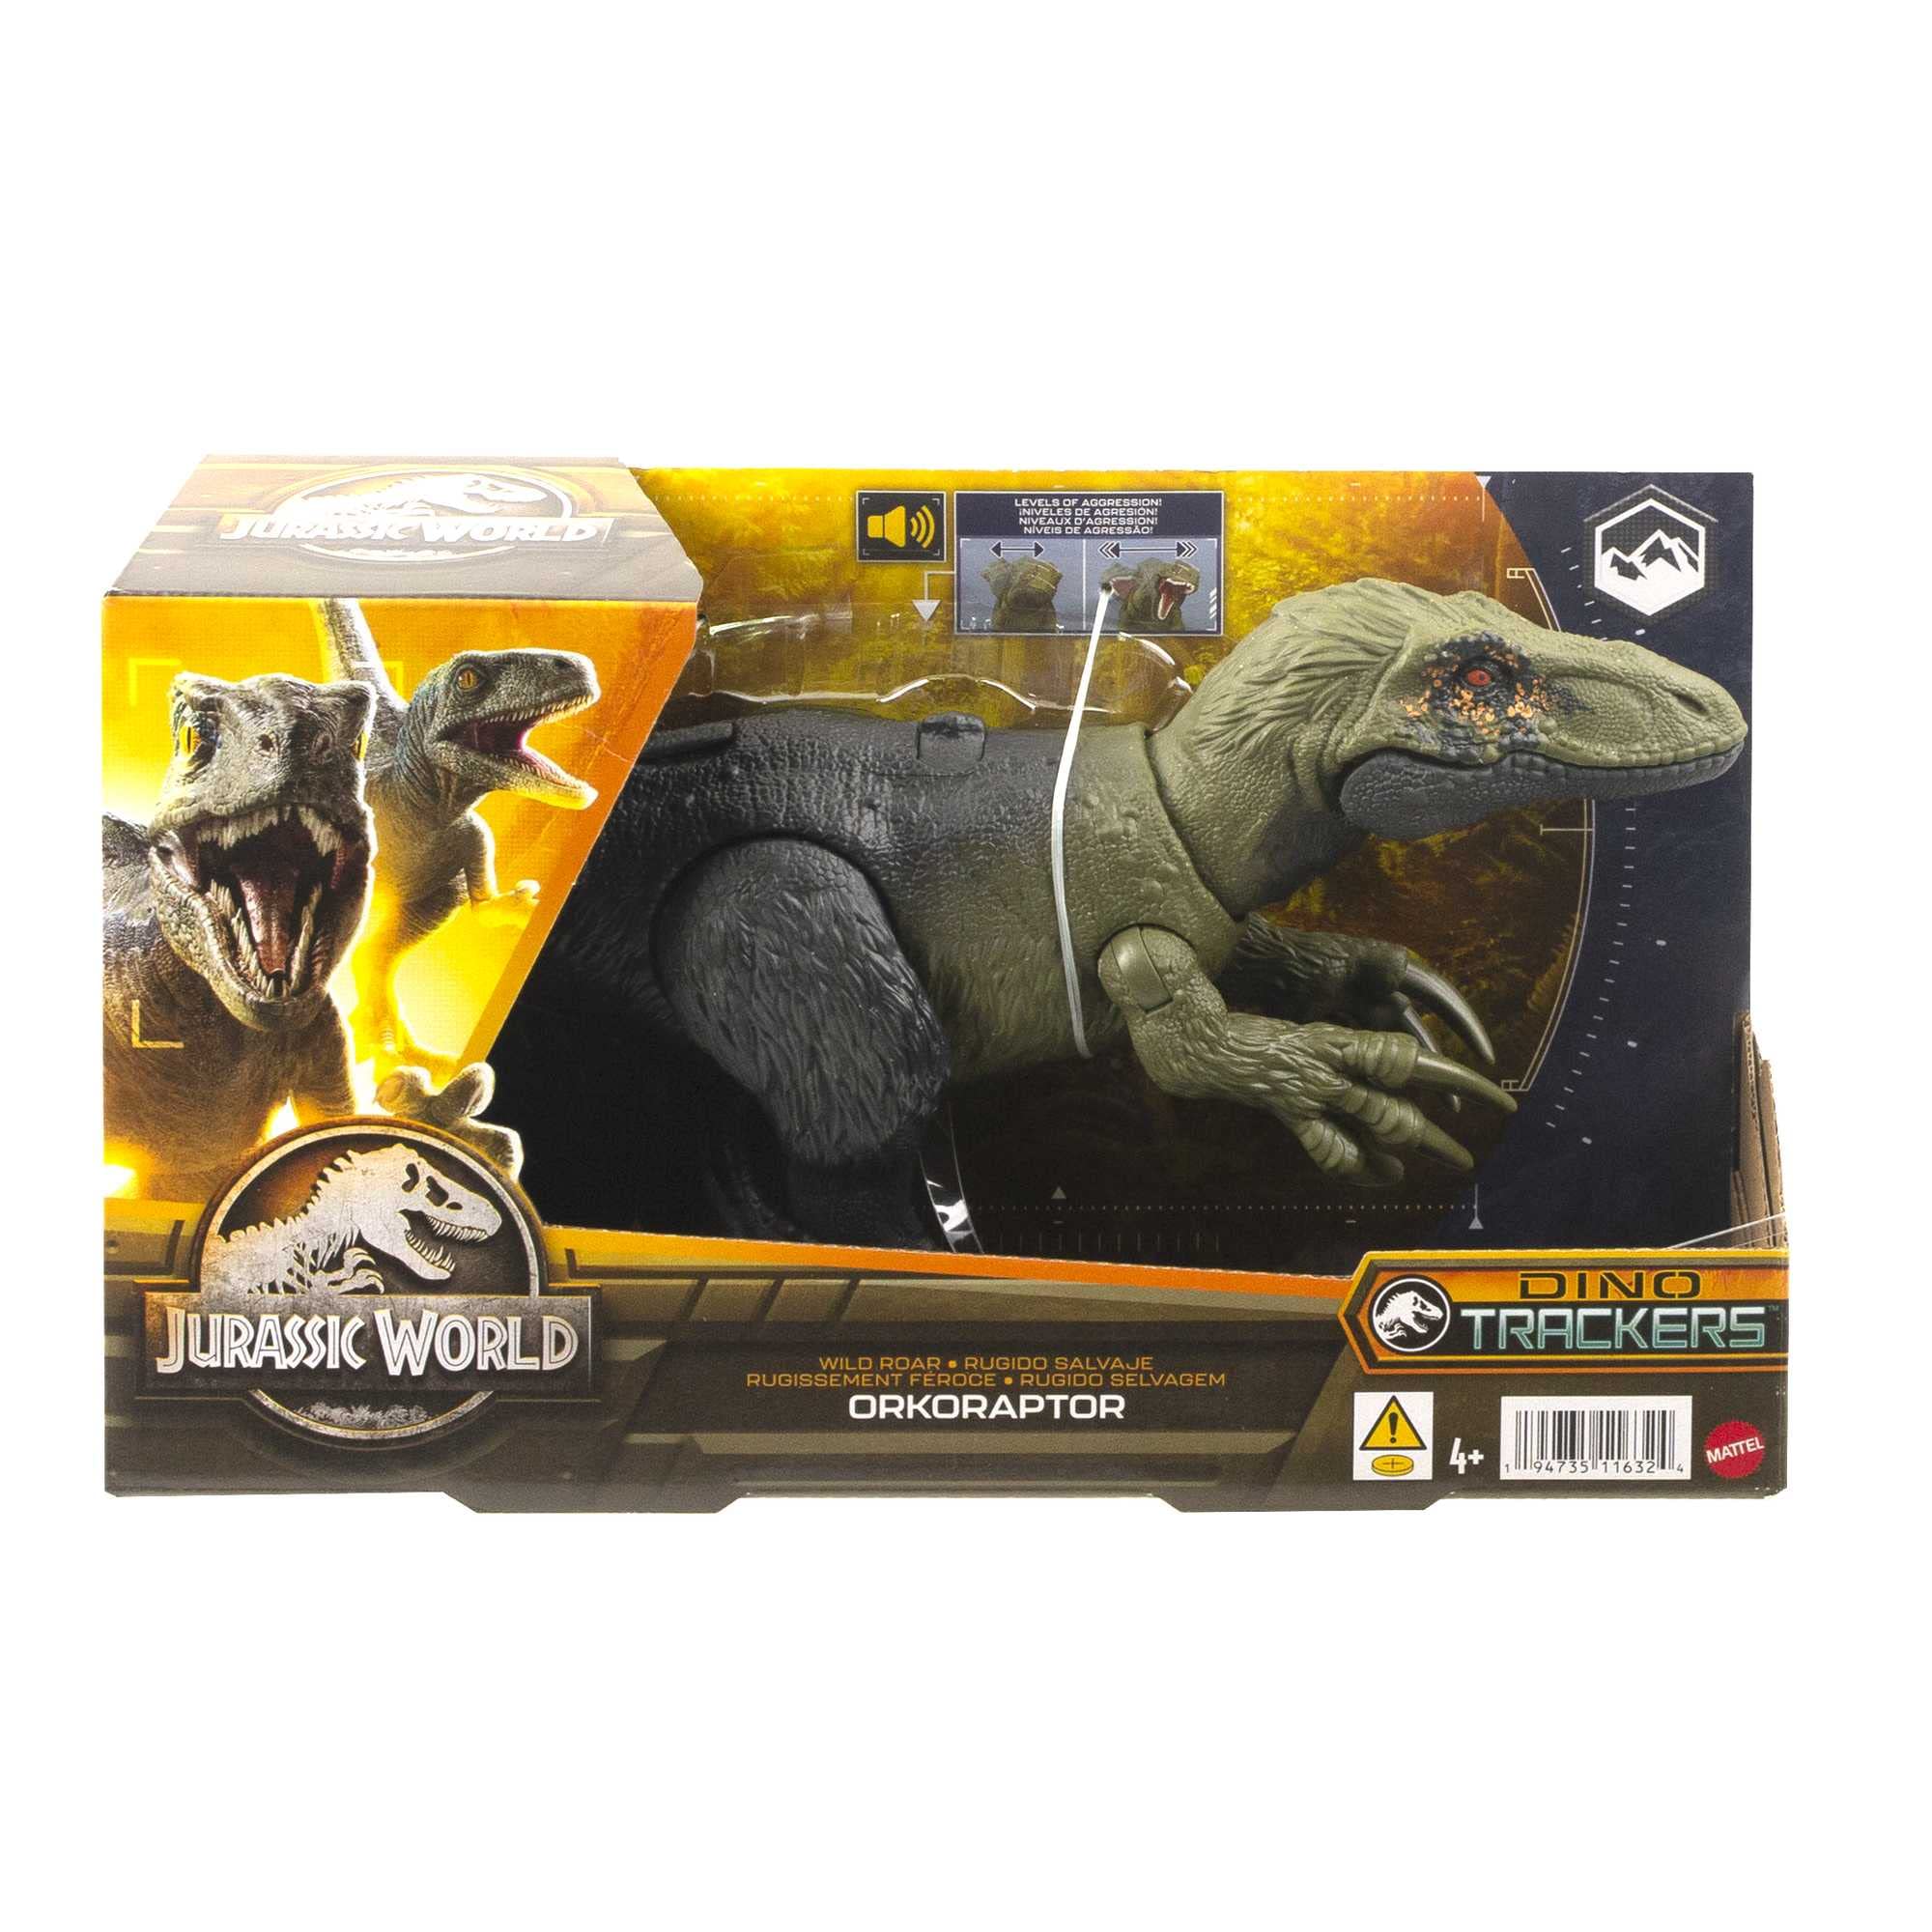 Jurassic World Dinosaur Toy Orkoraptor with Roar Sound & Attack Action, Wild Roar Posable Figure, Physical & Connected Digital Play